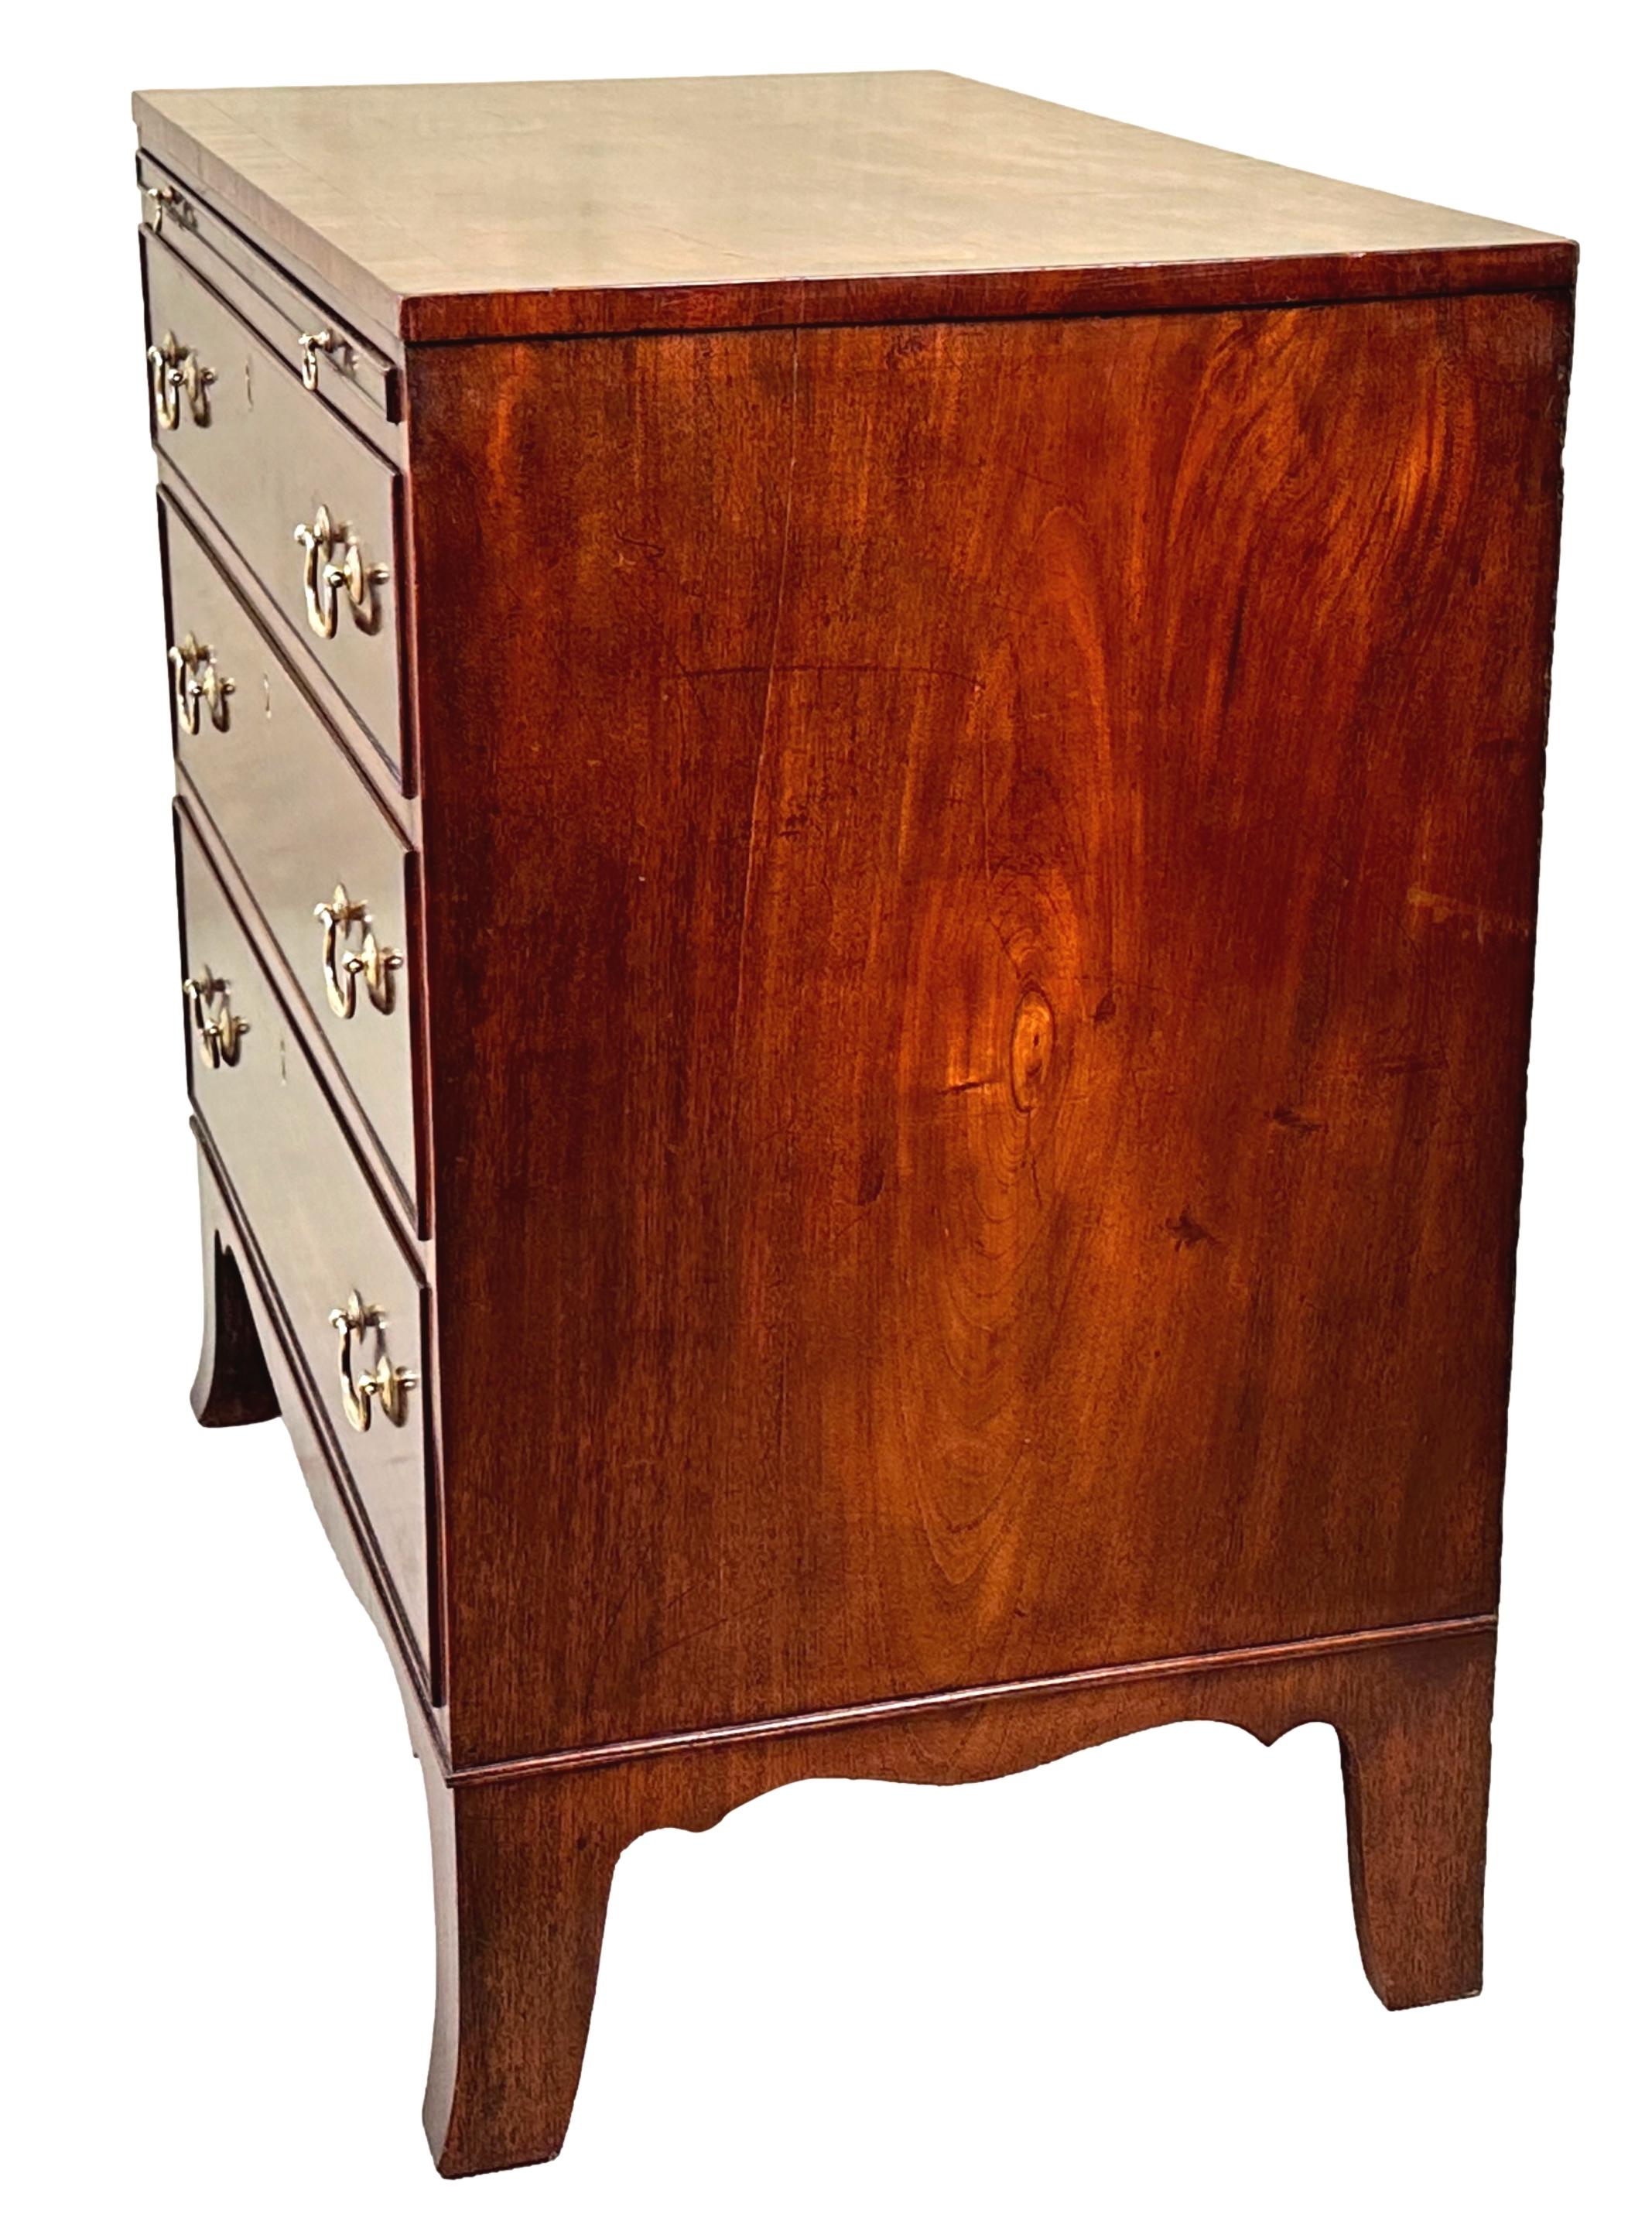 A Very Good Quality Early 19th Century, George III Period Mahogany Chest Of Unusual Small Proportions, Having Superbly Figured Rectanglar Top With Crossbanded Decoration, Over Slide And Three Long Drawers Retaining Original Brass Swan Neck Handles,